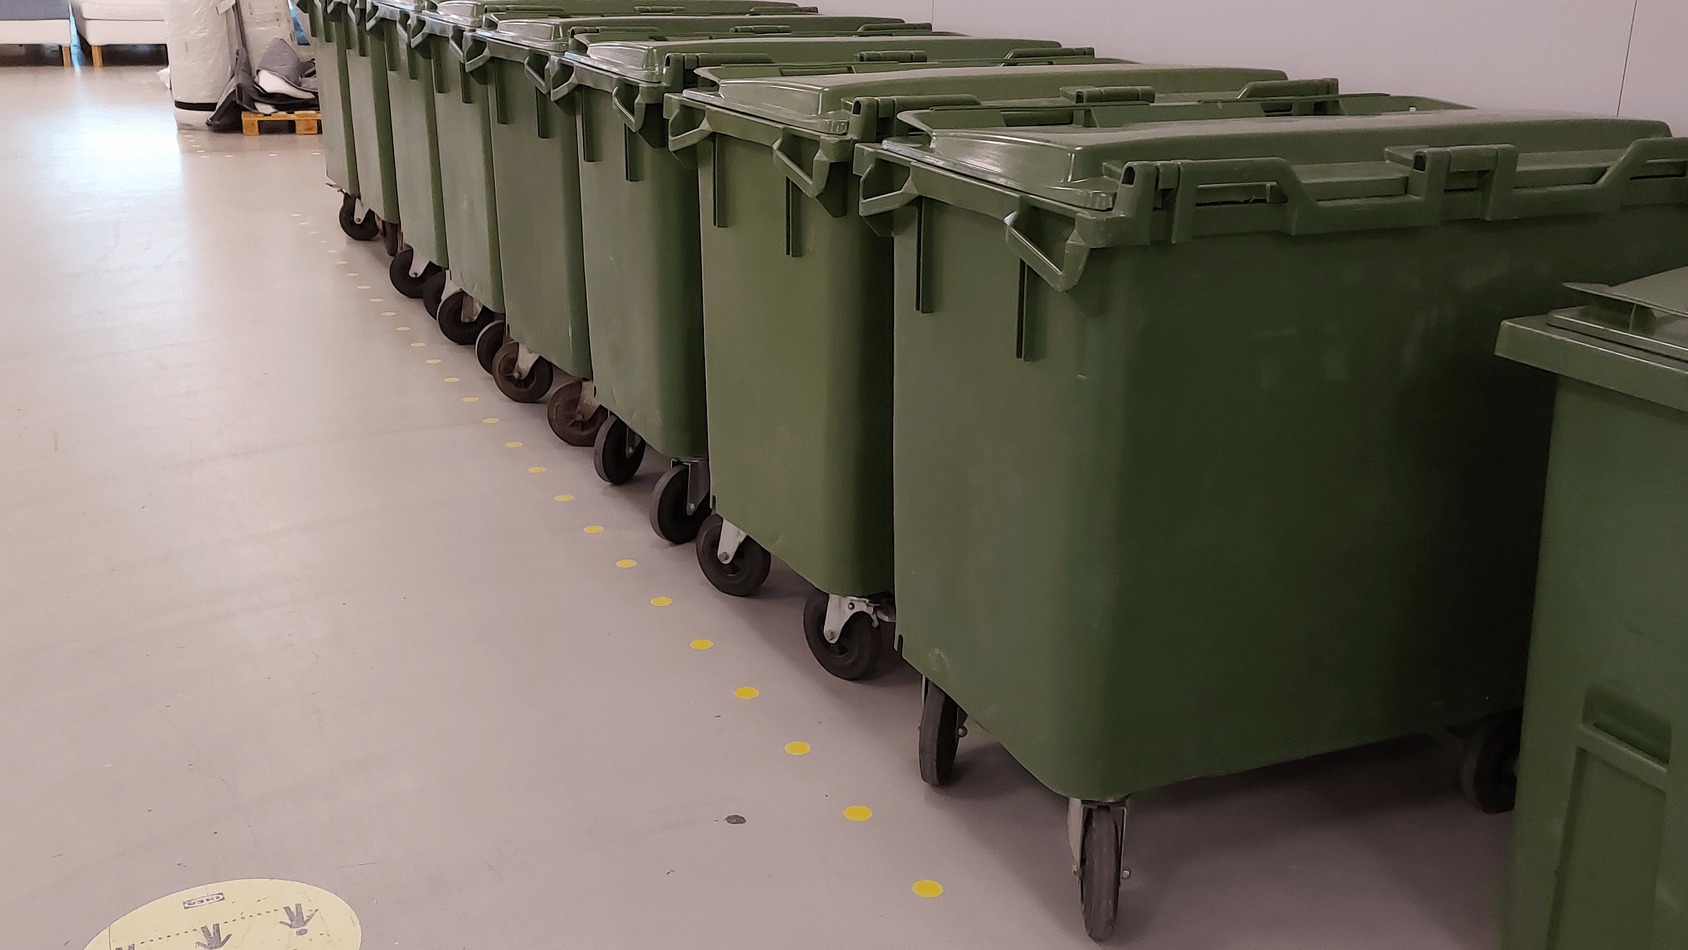 Learn More About Waste Cart Handling